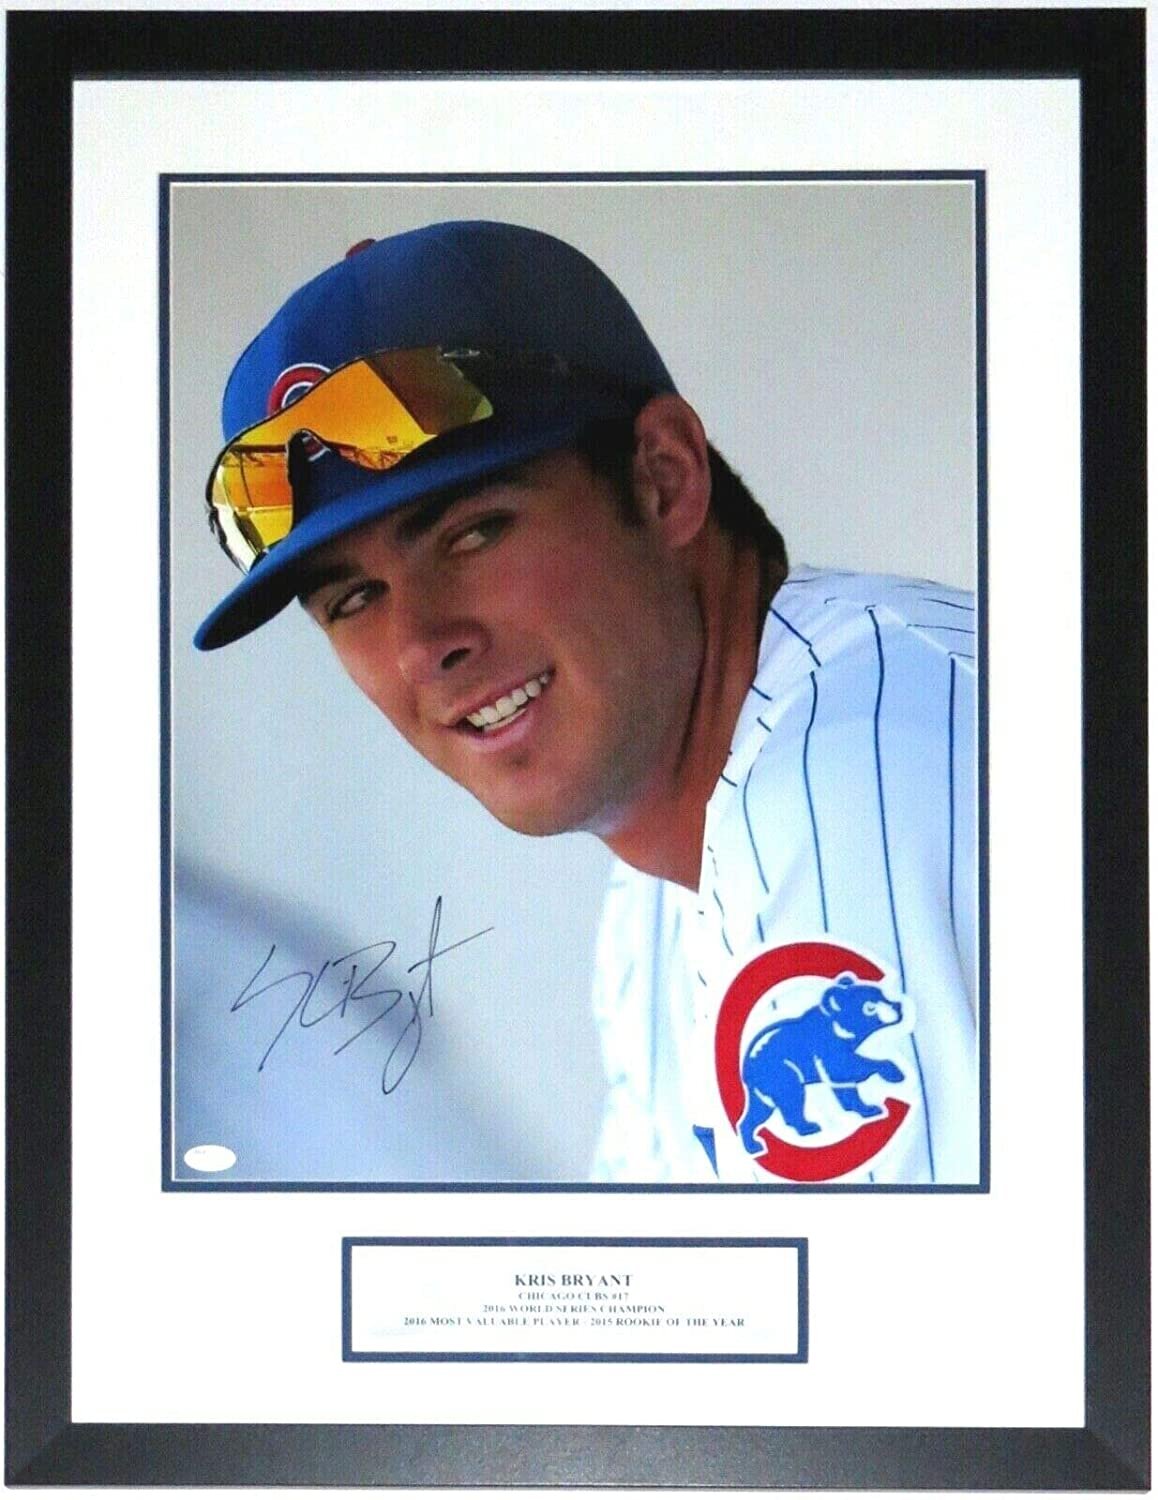 Bleachers Sports Music & Framing — Kris Bryant Signed Chicago Cubs